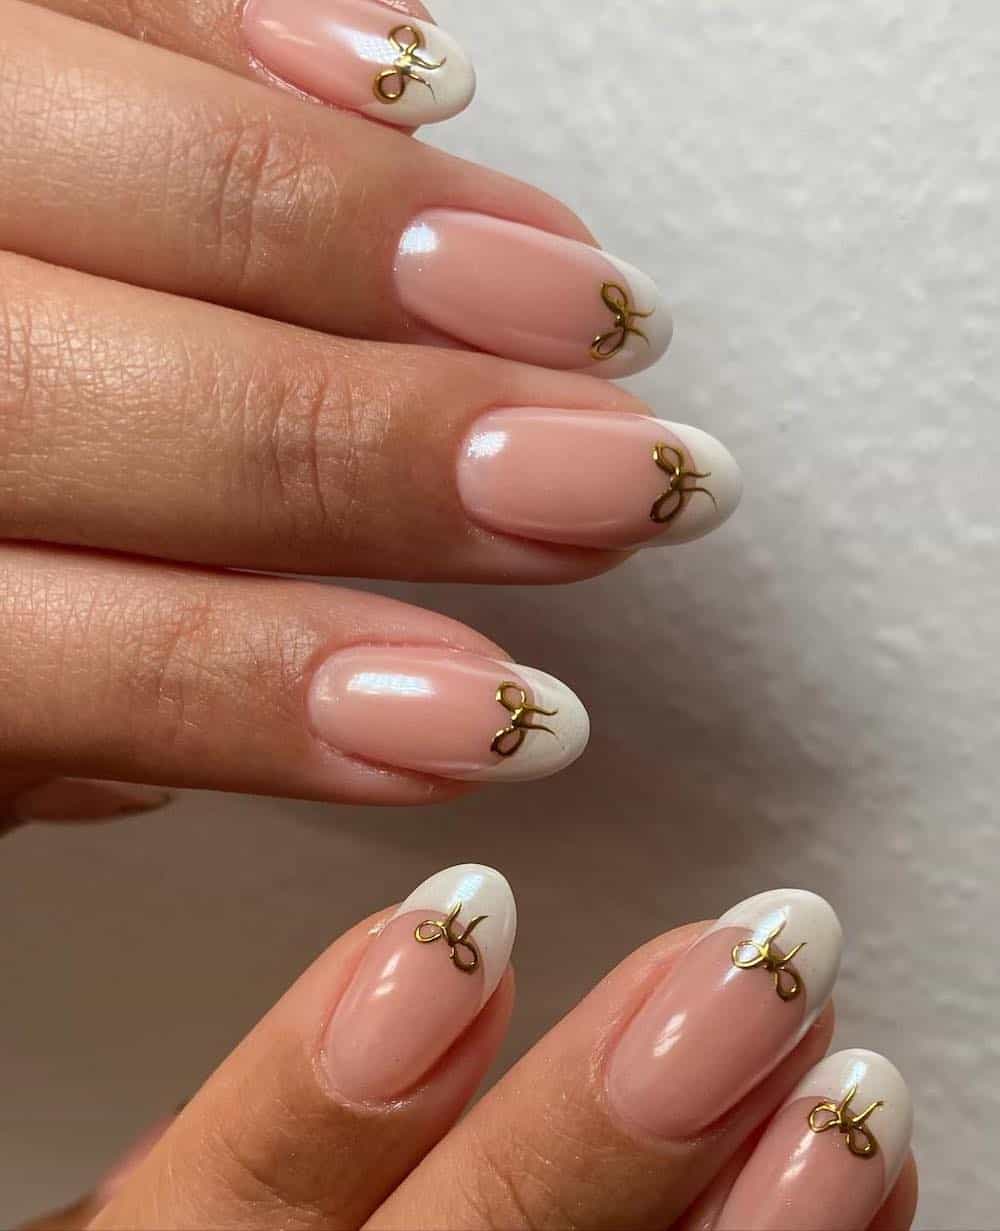 A hand with short almond nails with pearly French tips and golden bows